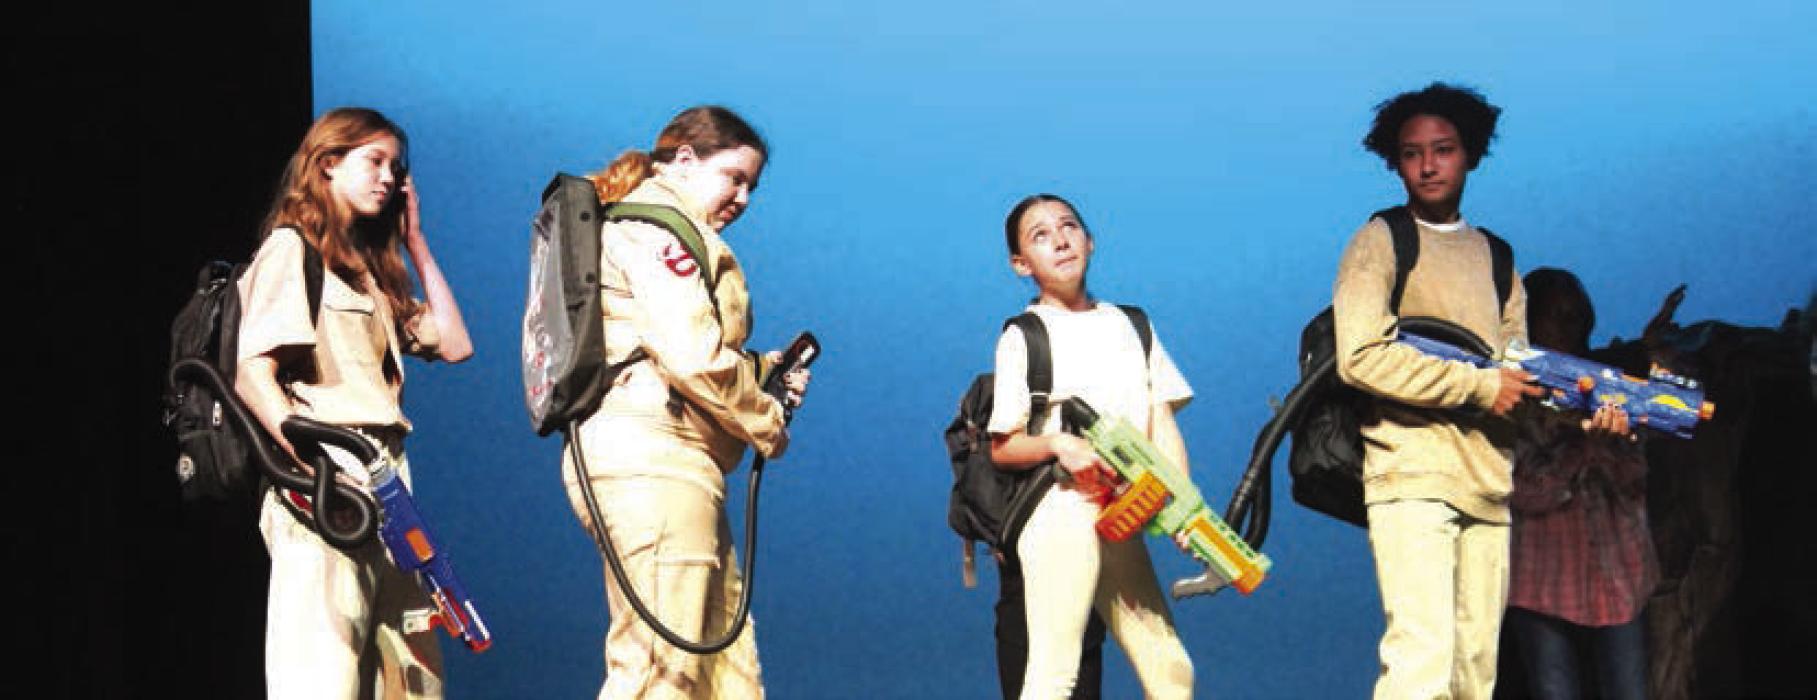 Apparition Apprehenders, the play’s take on the Ghostbusters.